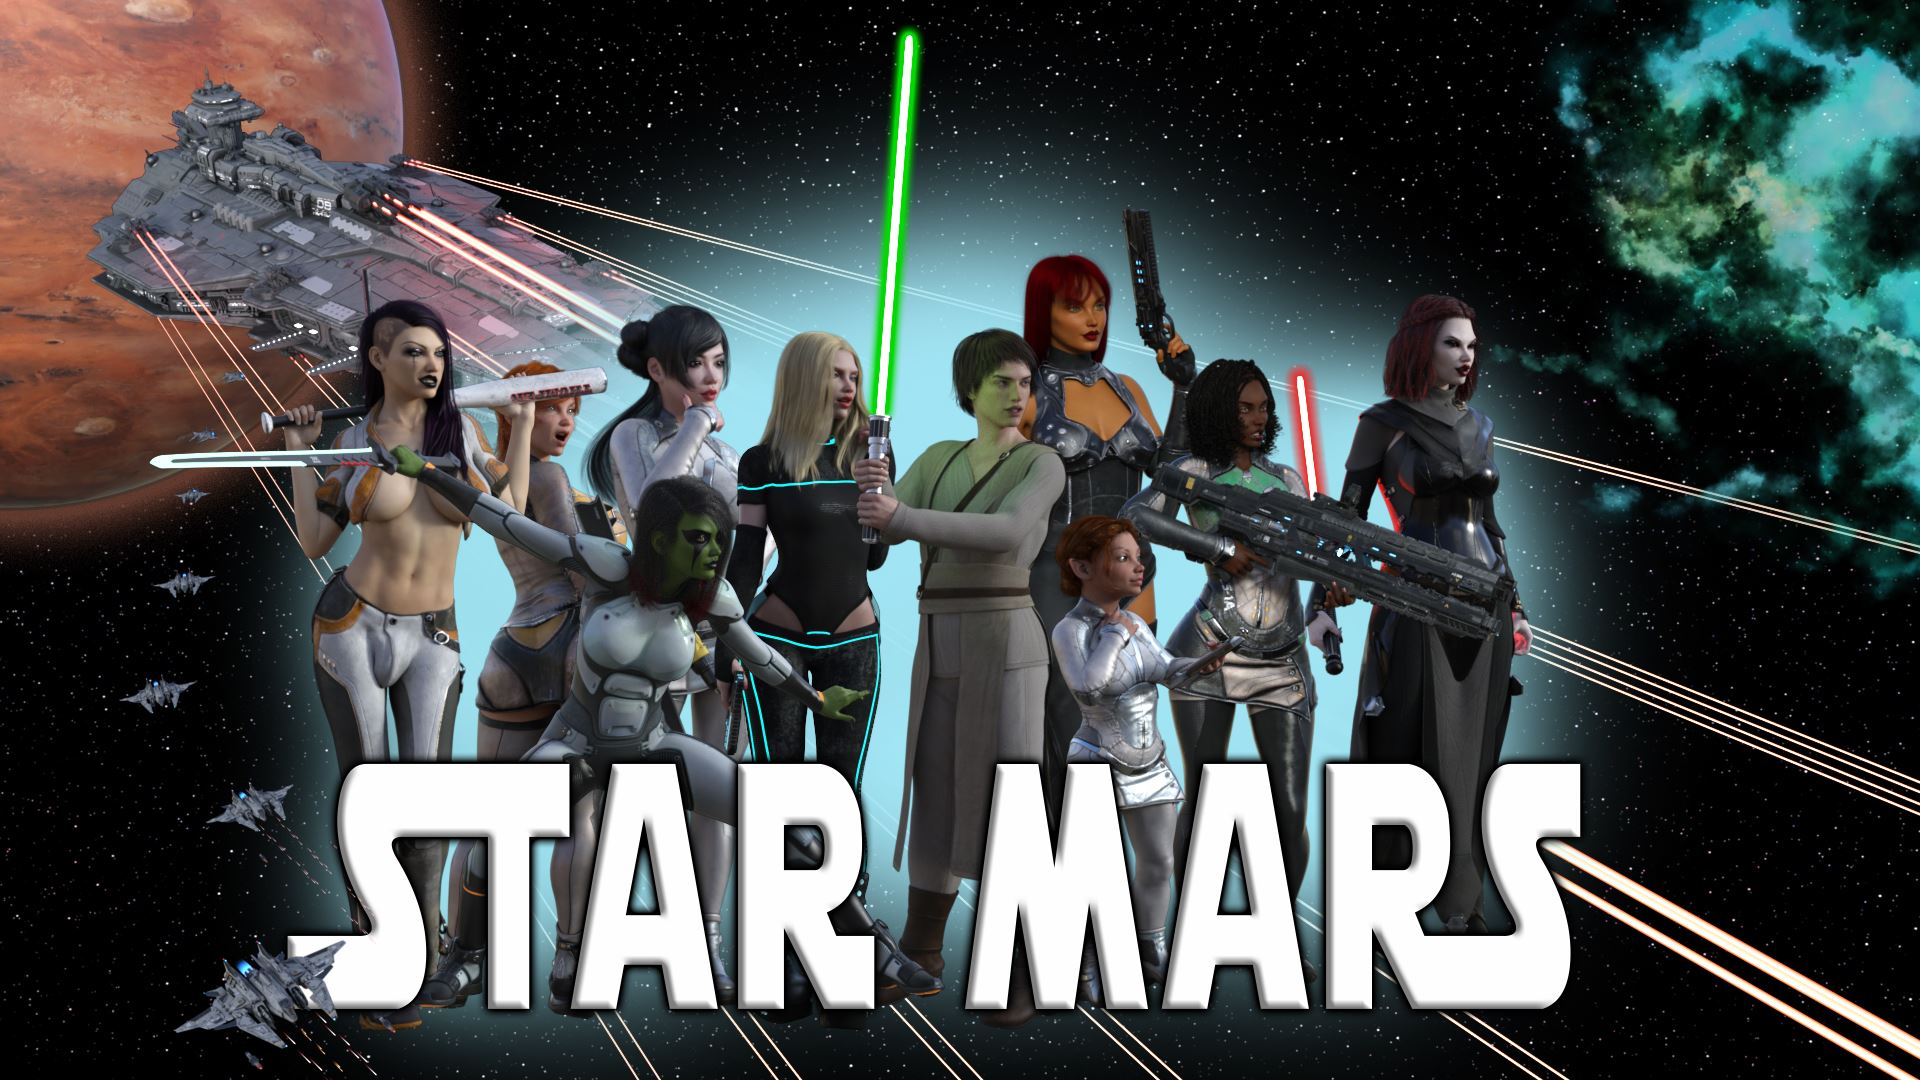 Star Mars porn xxx game download cover